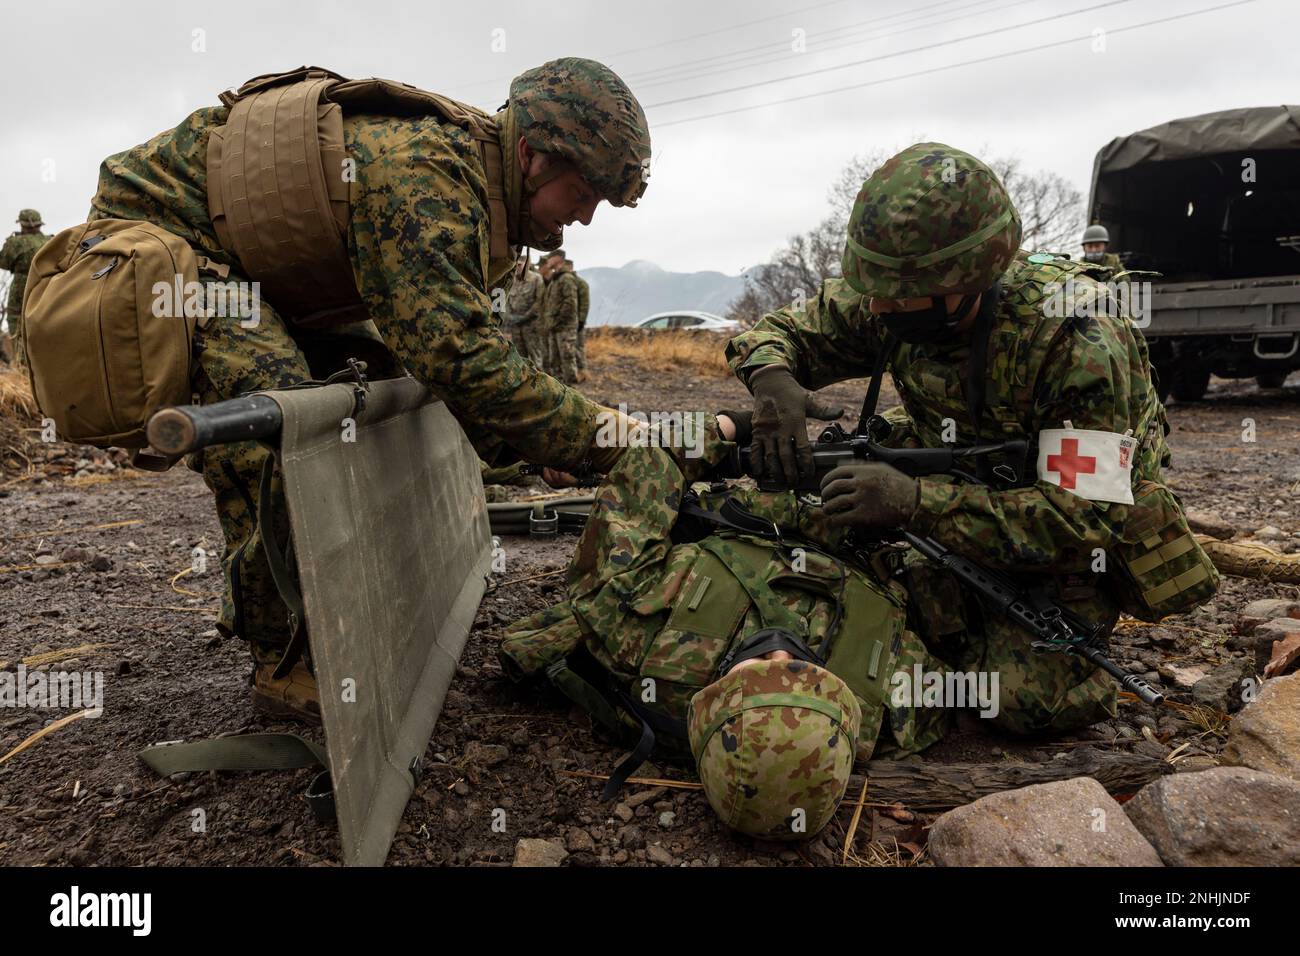 U.S. Navy corpsmen with the 31st Marine Expeditionary Unit, and a soldier with the 1st Amphibious Rapid Deployment Regiment, Japan Ground Self-Defense Force, prepare to lift a simulated casualty onto a stretcher during a mass casualty exercise at Hijudai, Japan on Feb. 19, 2023. The training simulated a mass casualty event granting the bi-lateral medical team an opportunity to actively practice medical care in the field with closely simulated pressure and conditions during Iron Fist 23. Iron Fist is an annual bilateral exercise designed to increase interoperability and strengthen the relations Stock Photo